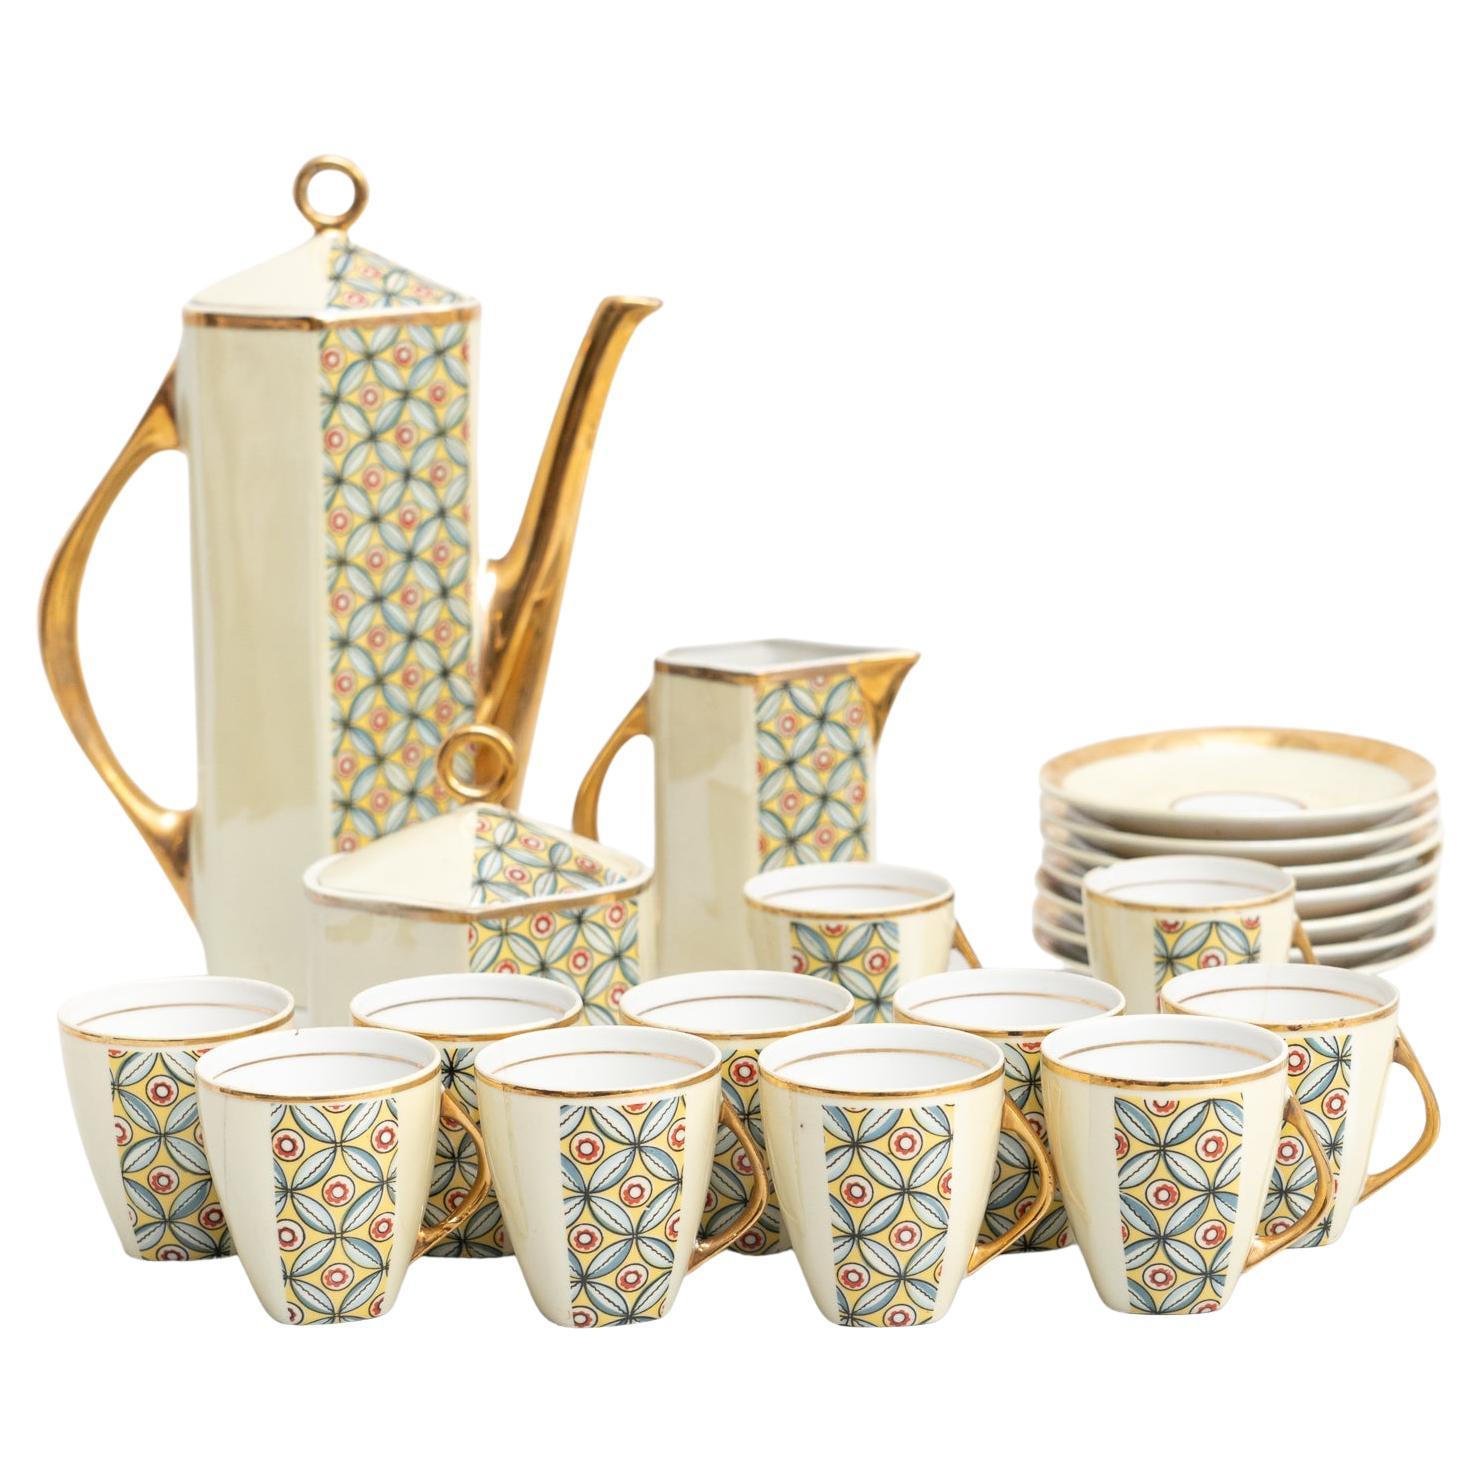 Traditional Antique French Coffee Set of 21 Pieces, circa 1950